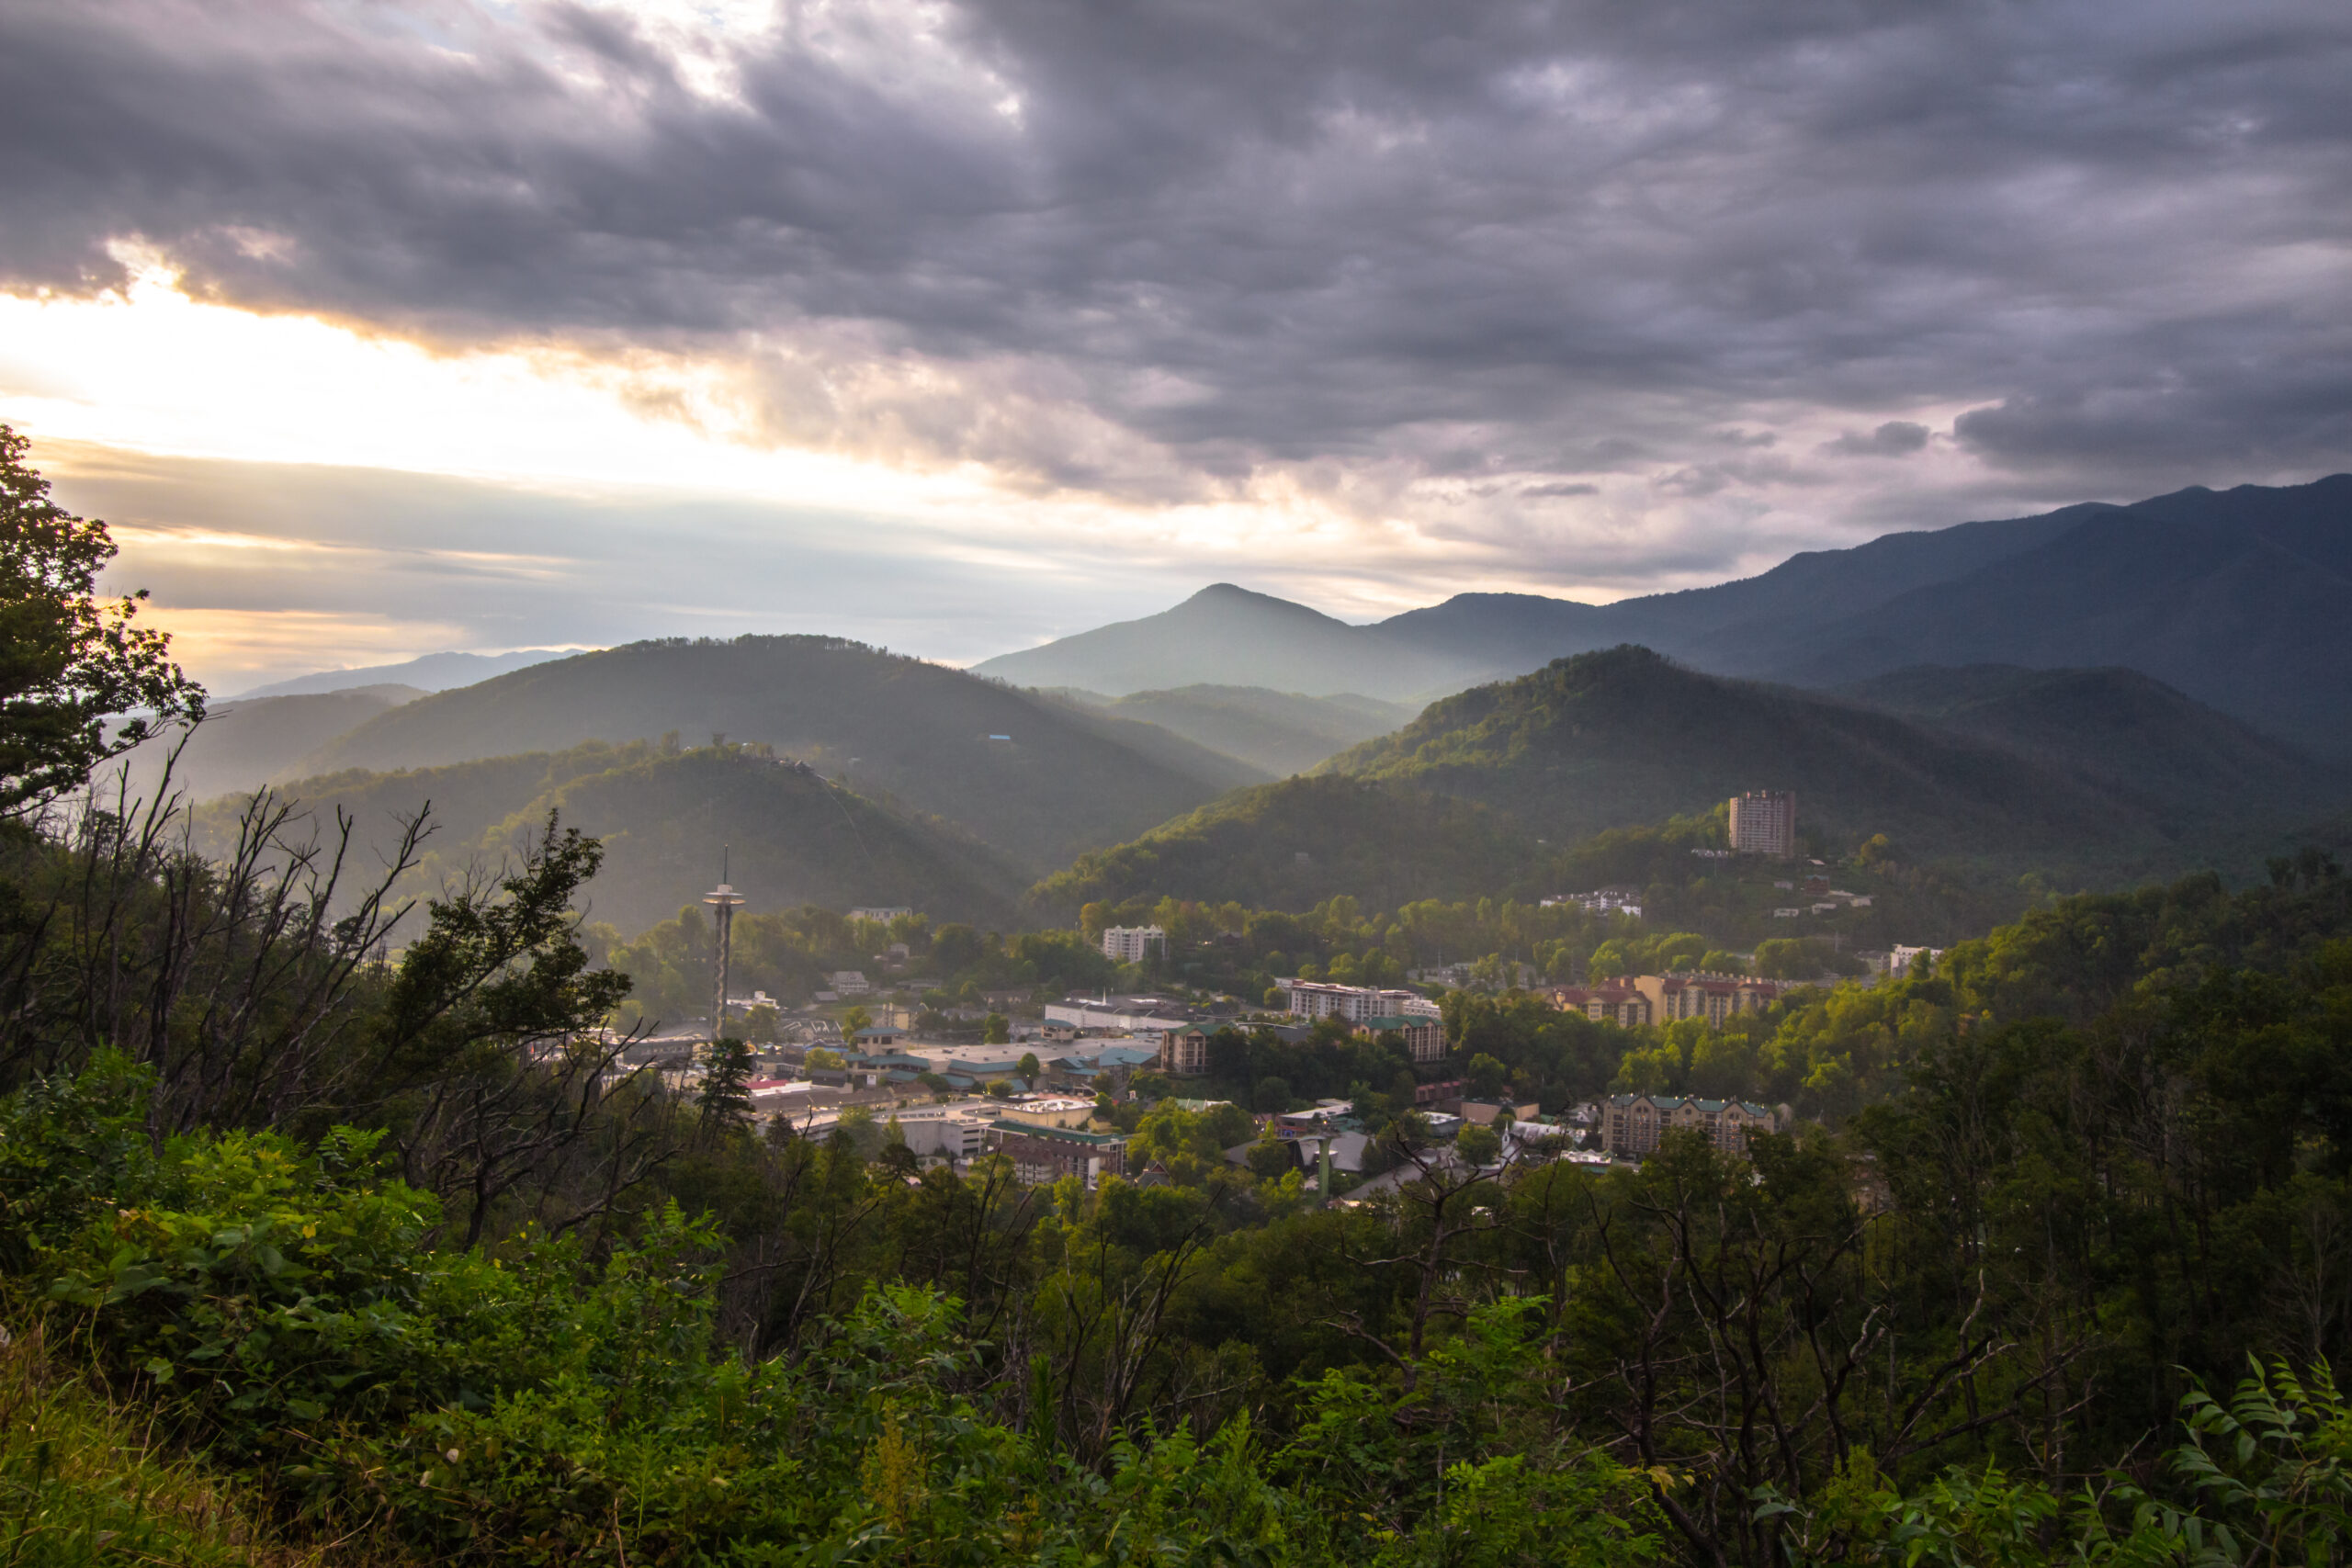 Self-care in the Smoky Mountains